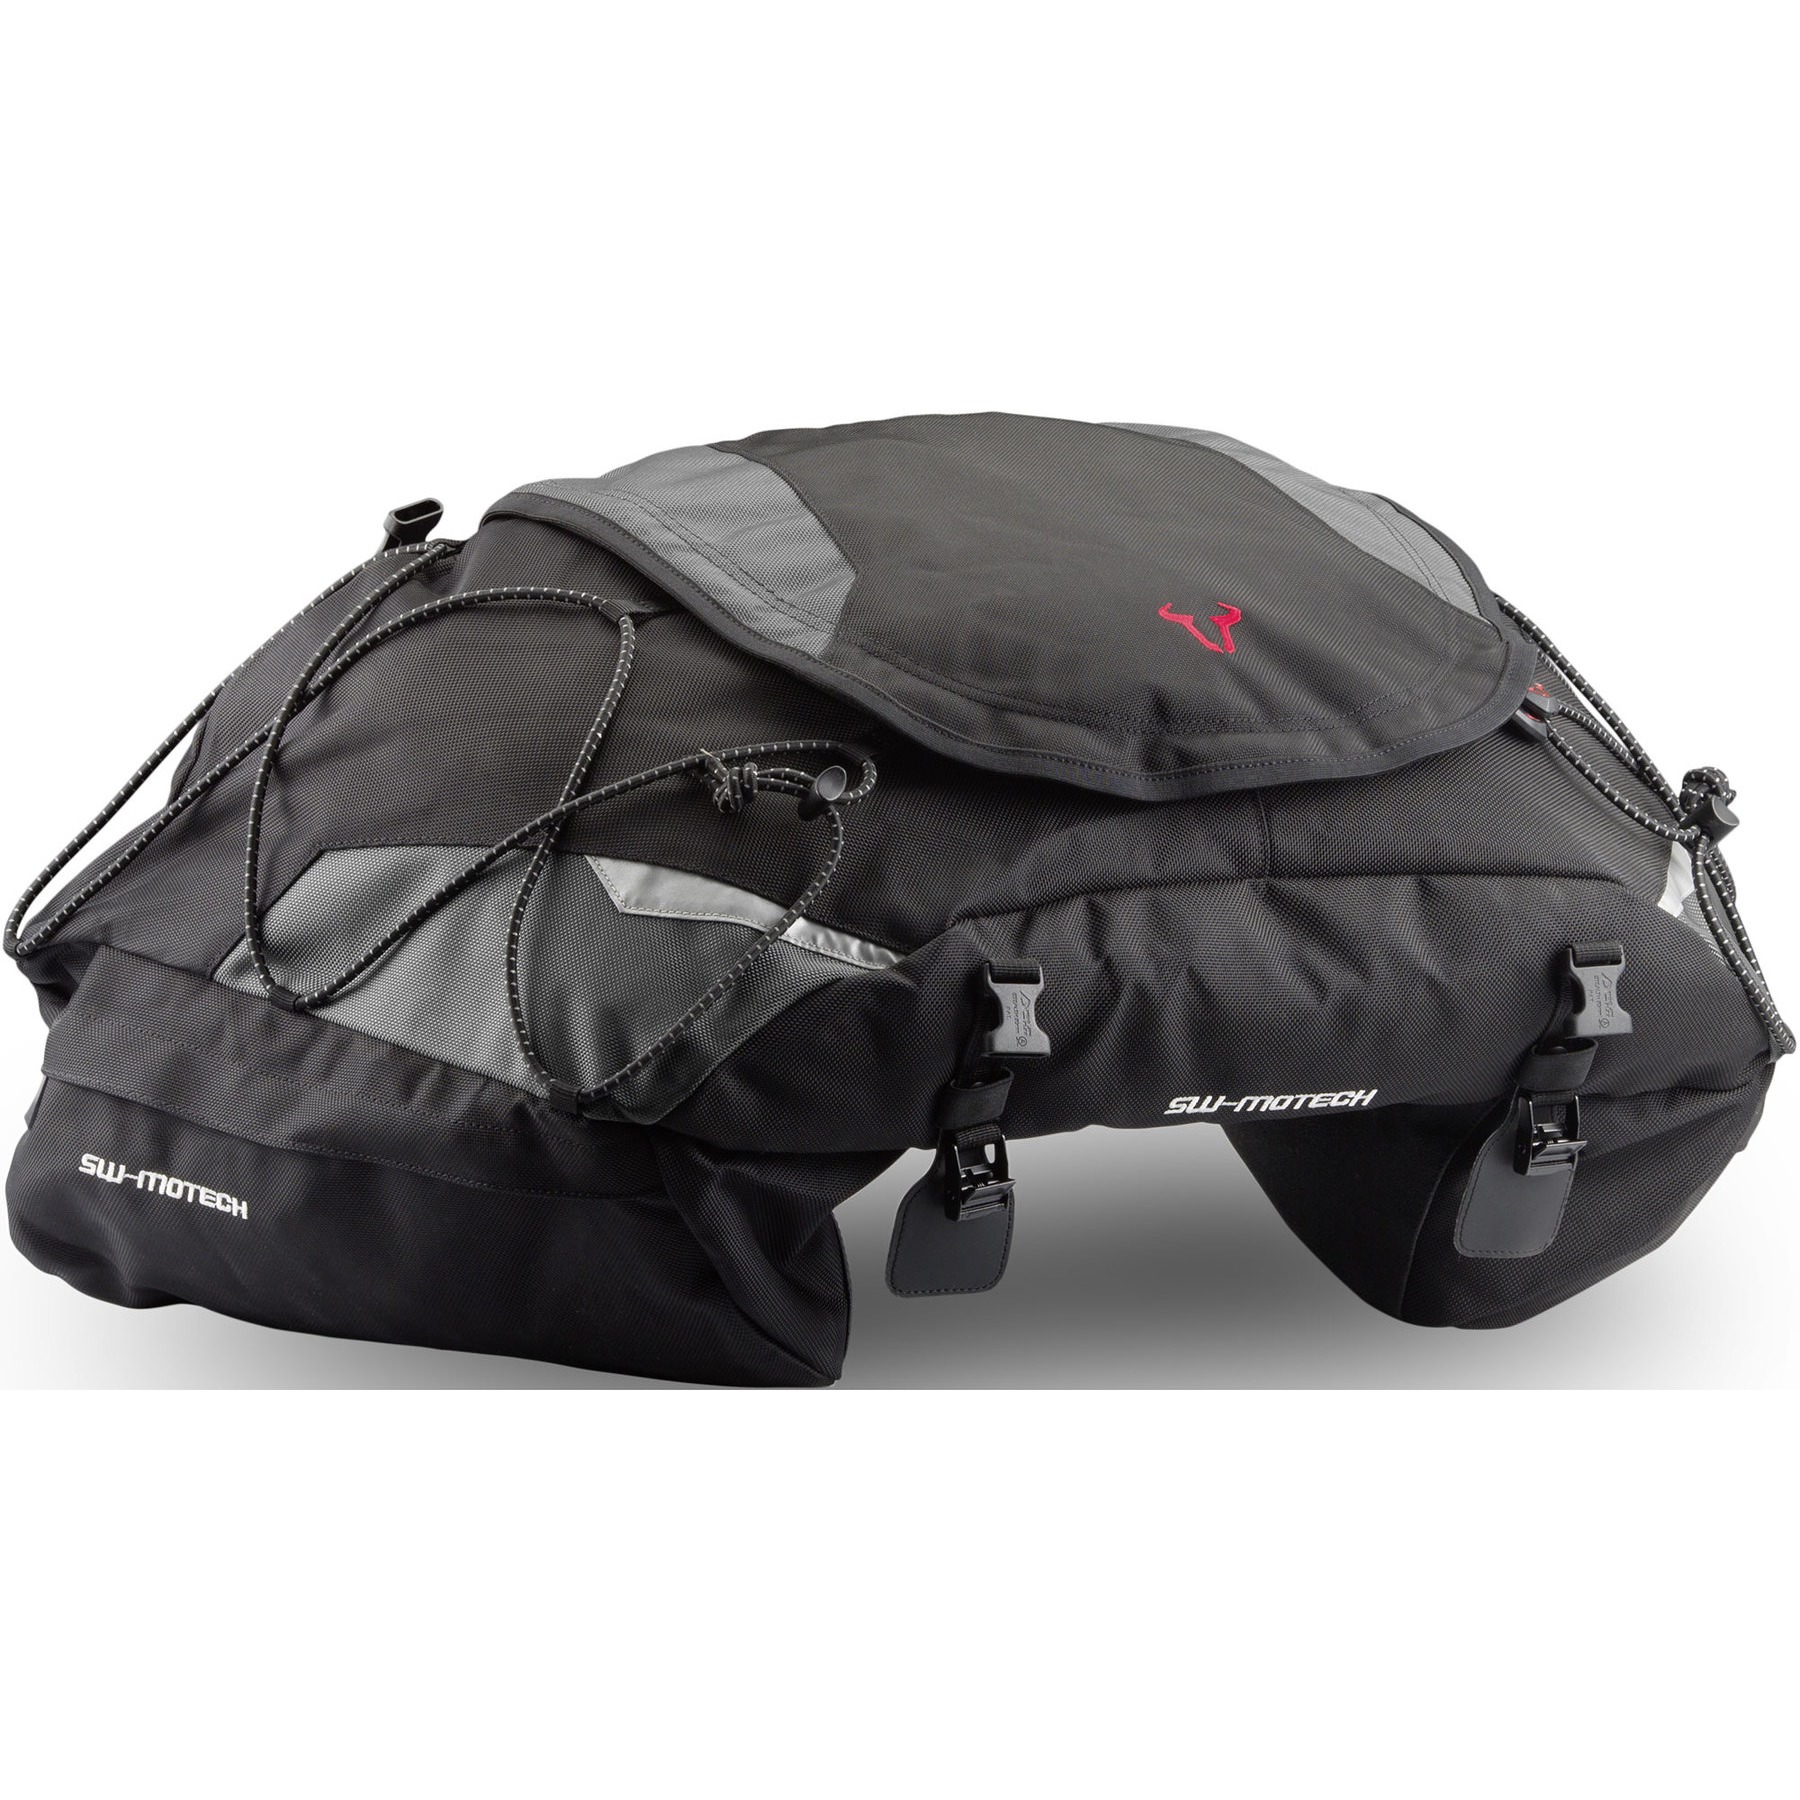 Motorcycle Tail pack SW Motech Cargo bag Tailbag 50 Litre